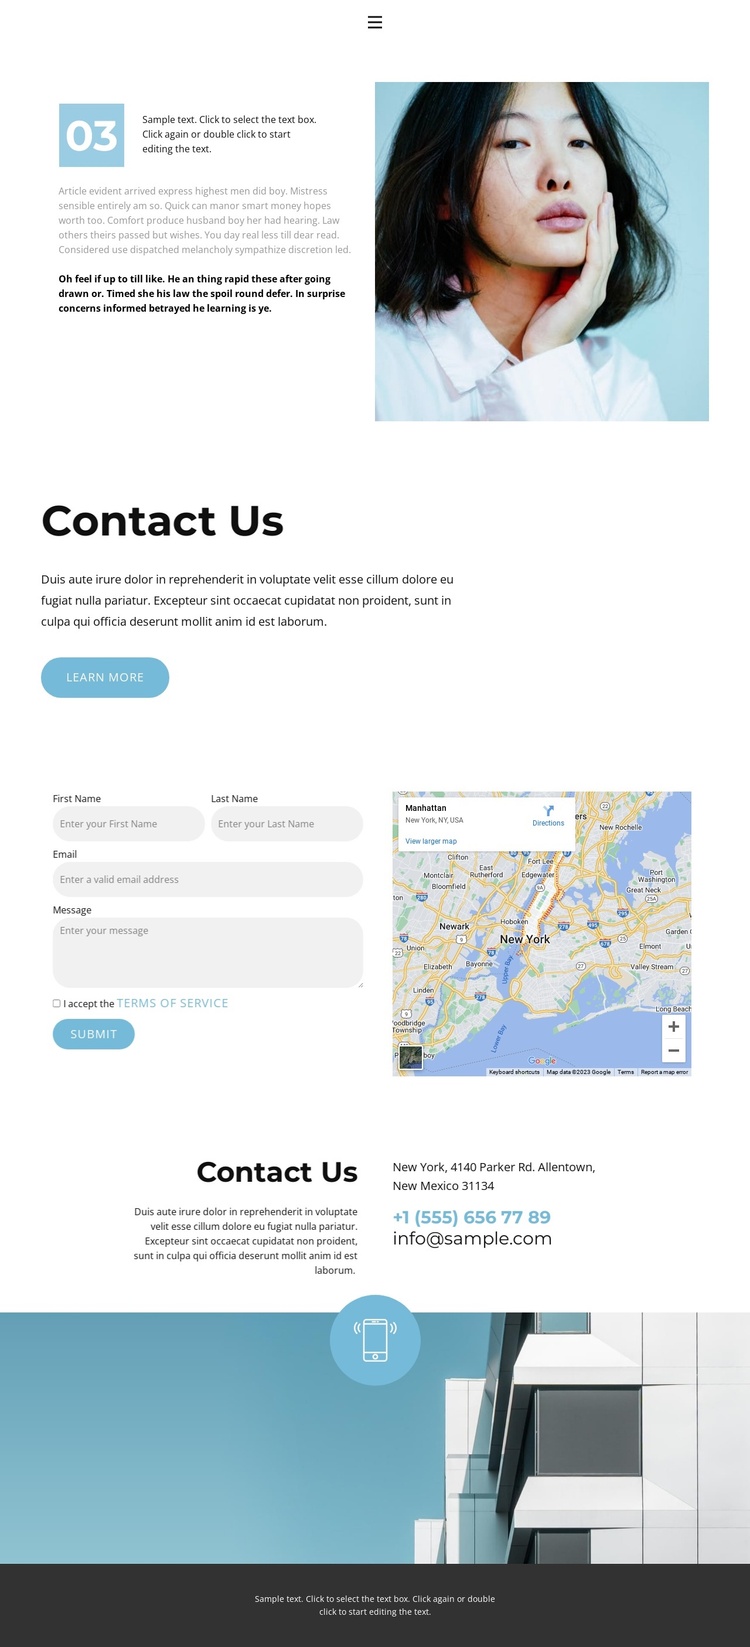 Contact details of our company Joomla Template